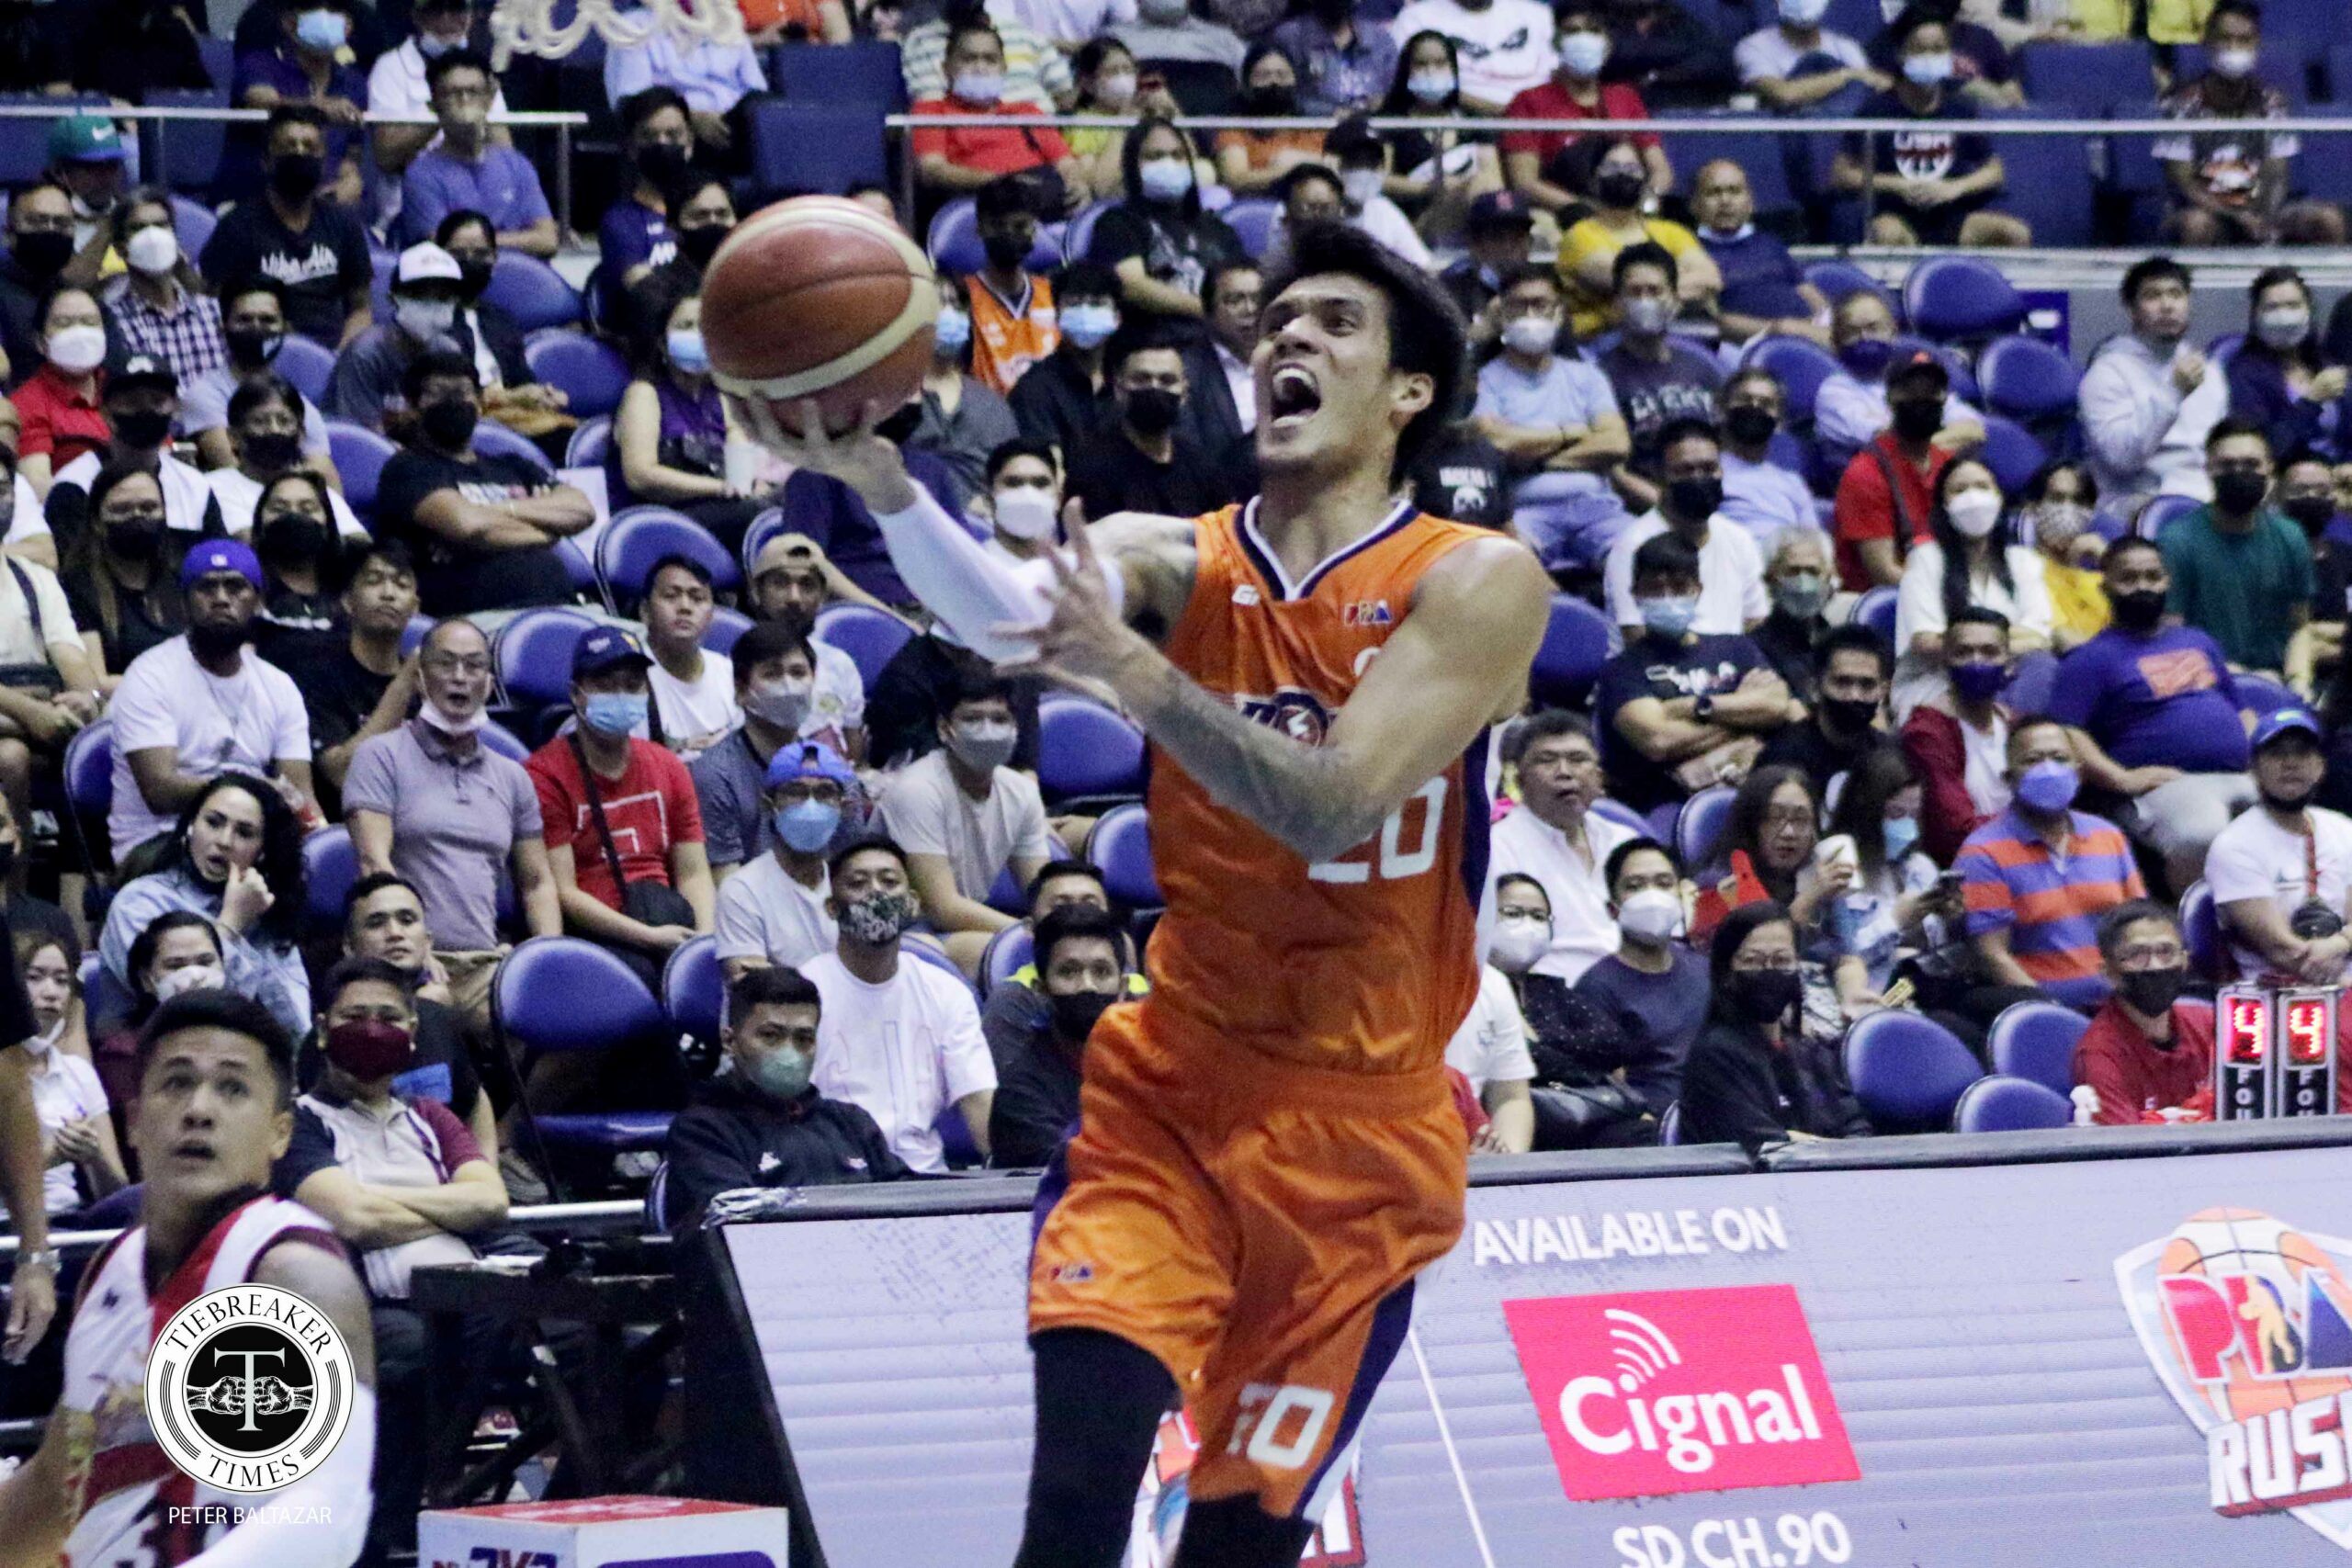 2022-PBA-Philippine-Cup-Semis-Meralco-vs-San-Miguel-Raymond-Almazan-scaled Top four finish in PH Cup shows Meralco's improvements, says Black Basketball News PBA  - philippine sports news